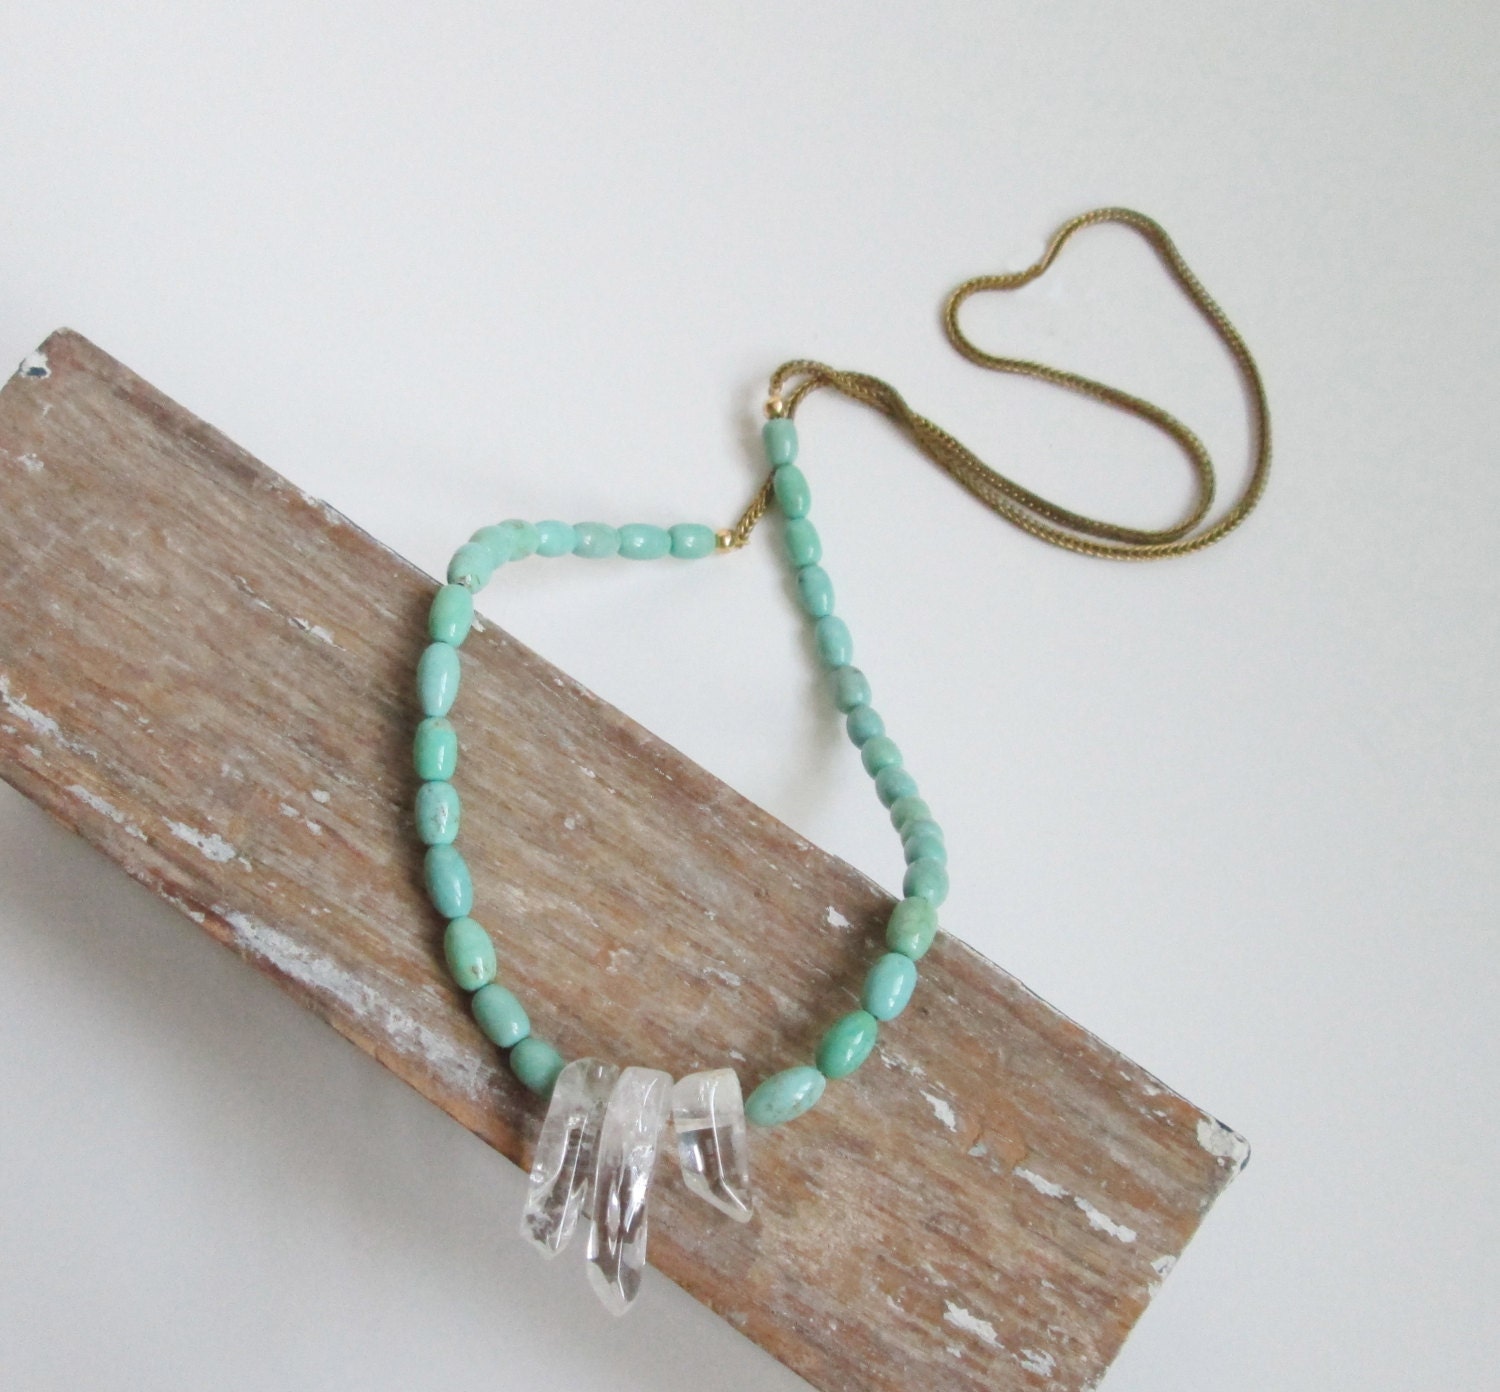 Quartz Spike and Minty Howlite Necklace. Long Beaded Neacklace. Simple. Minimal. Mint. Turquoise. - MissCAlexandria